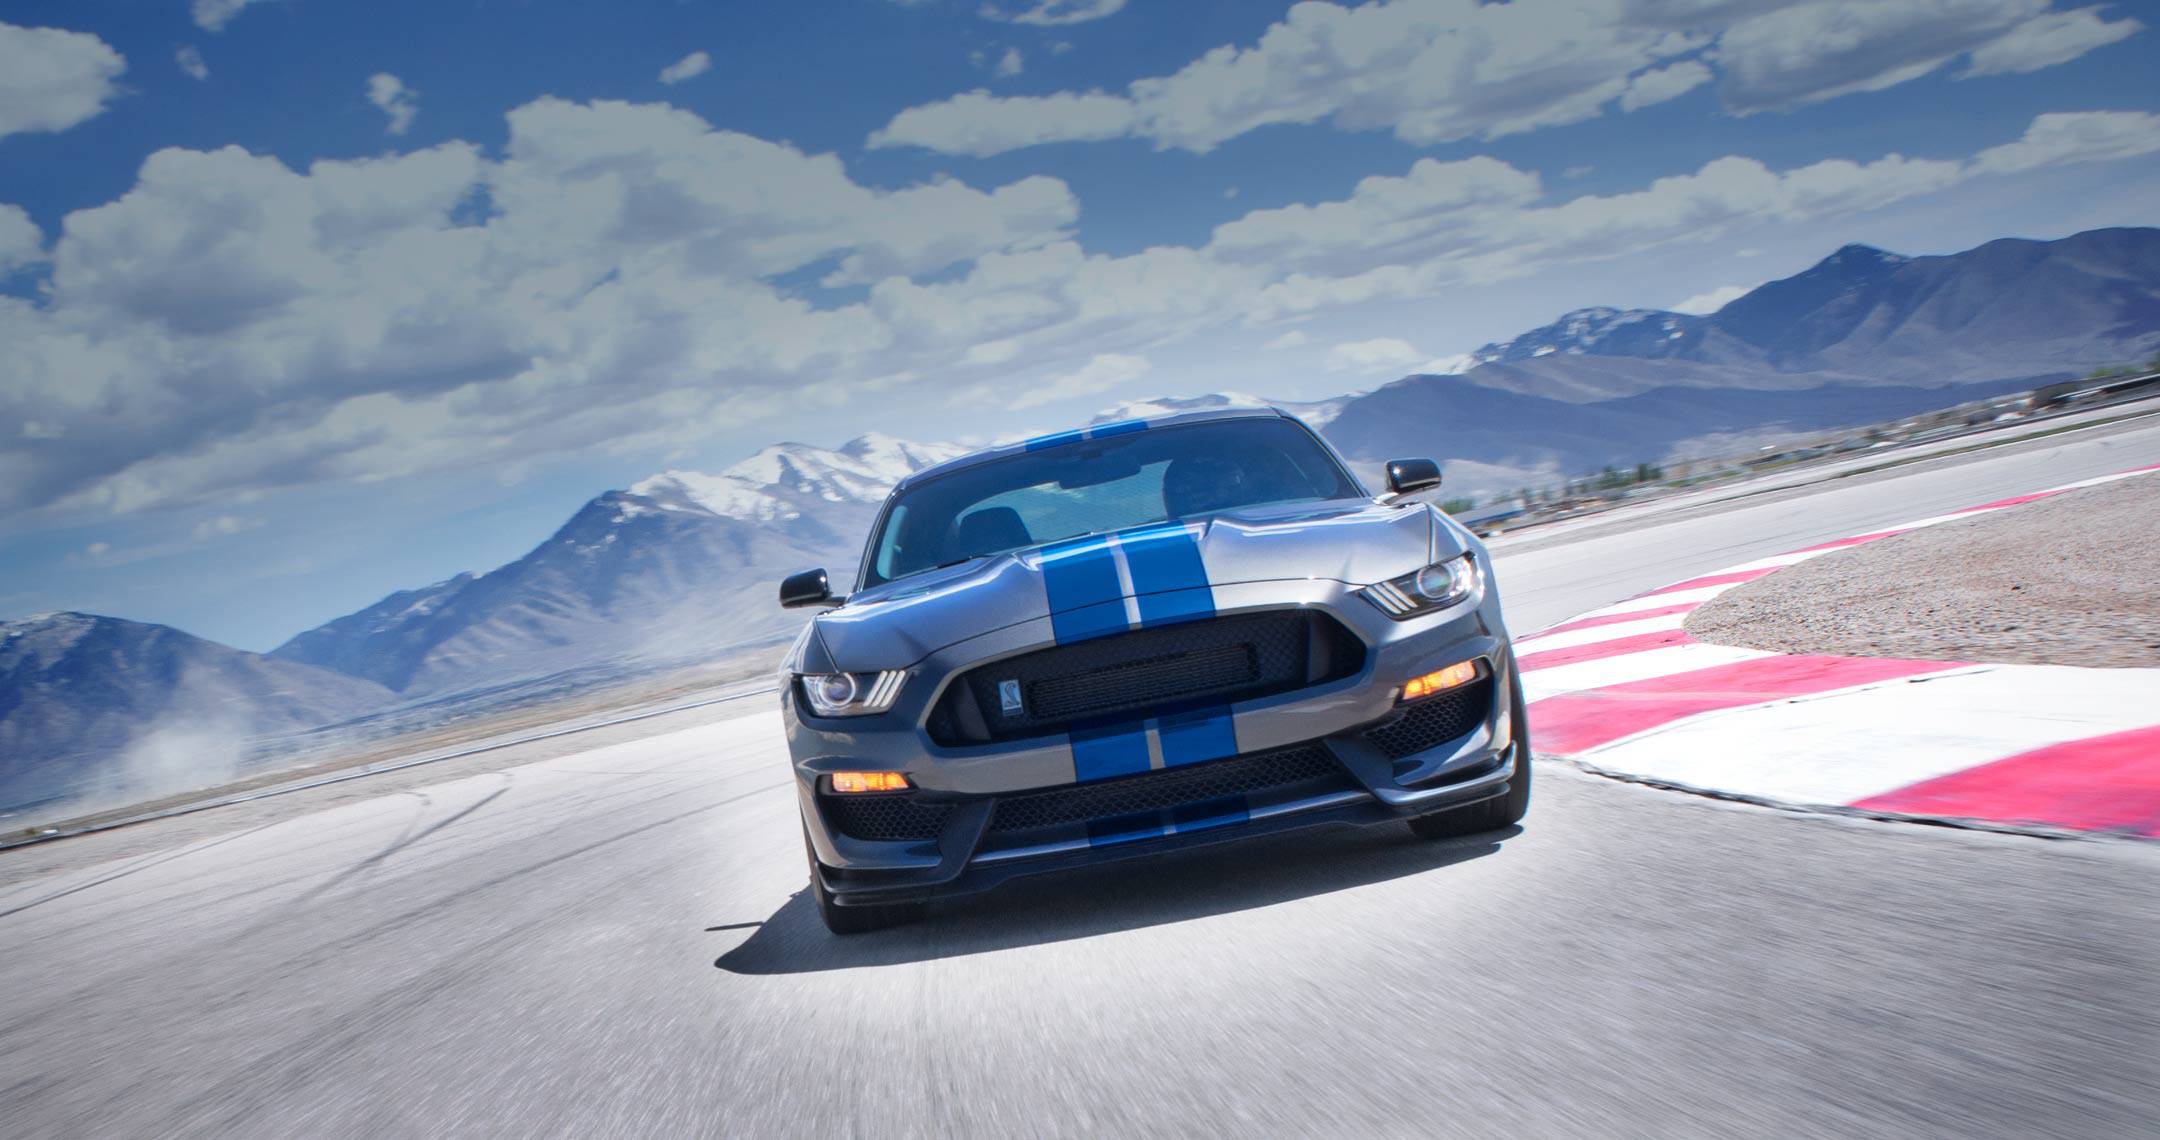 Shelby Mustang Gt350 Image HD Wallpaper And